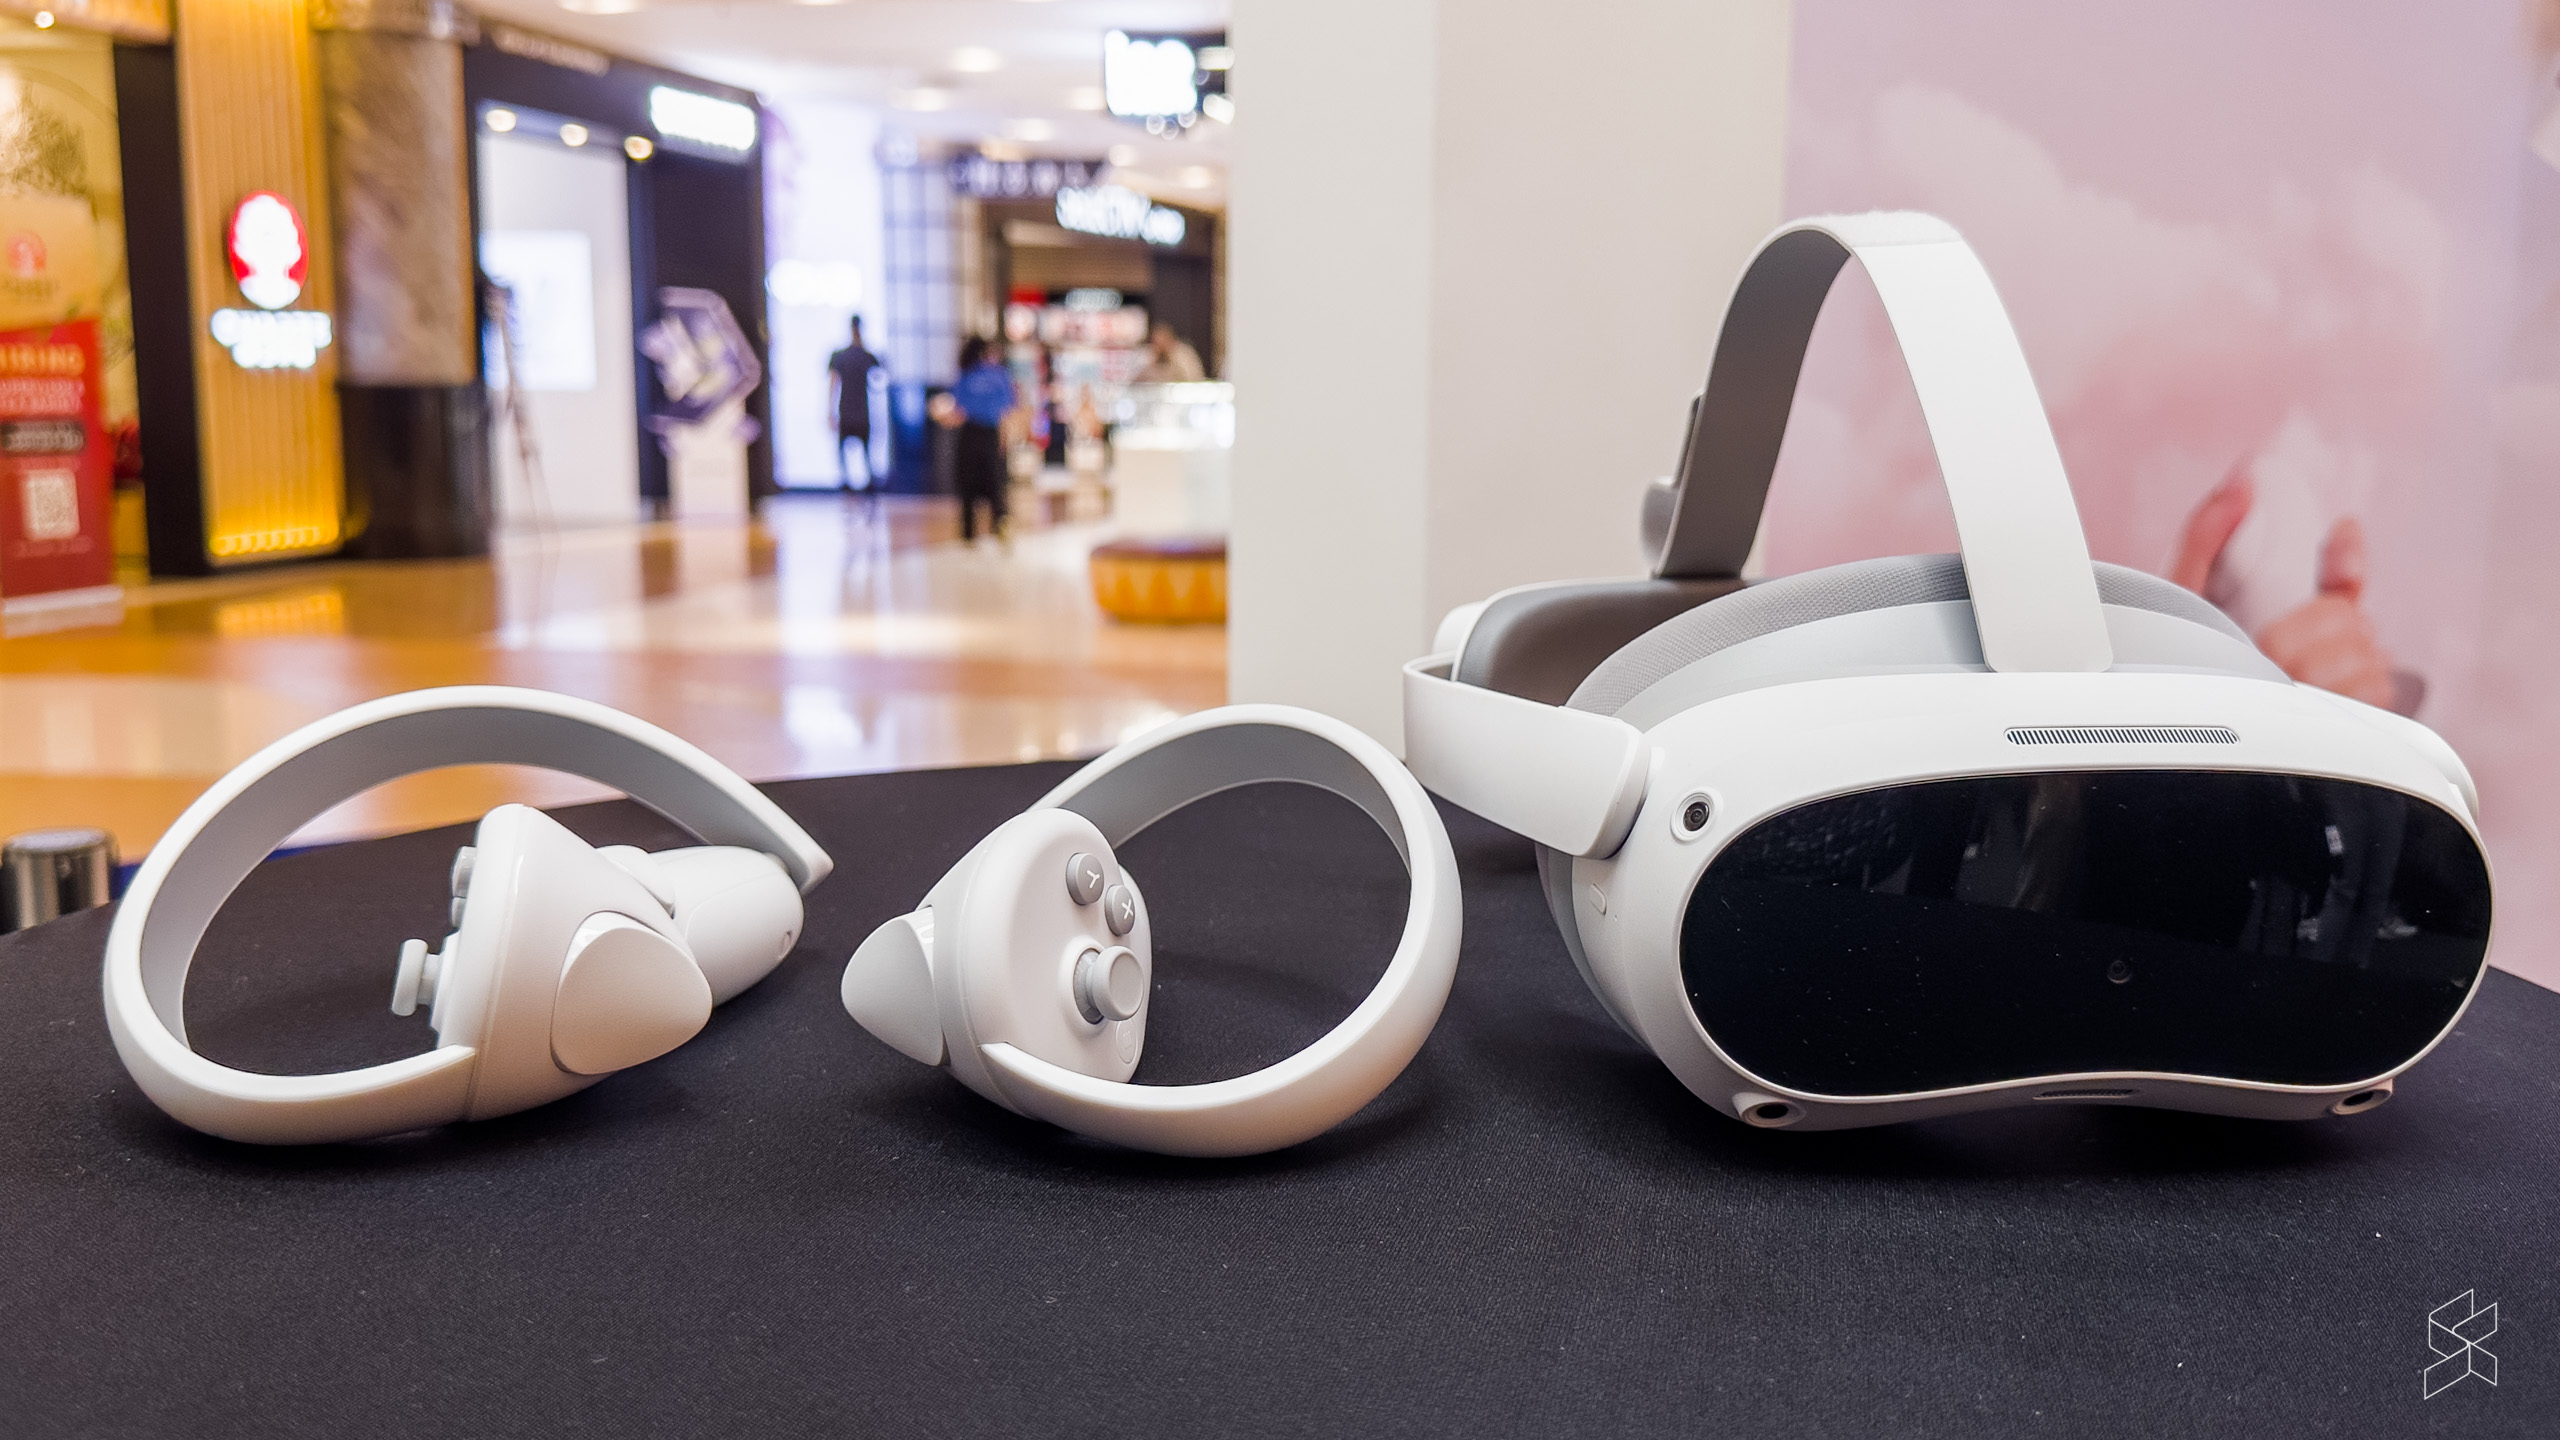 Pico 4 VR Headset Coming with October Release Date, Specs vs. Quest 2